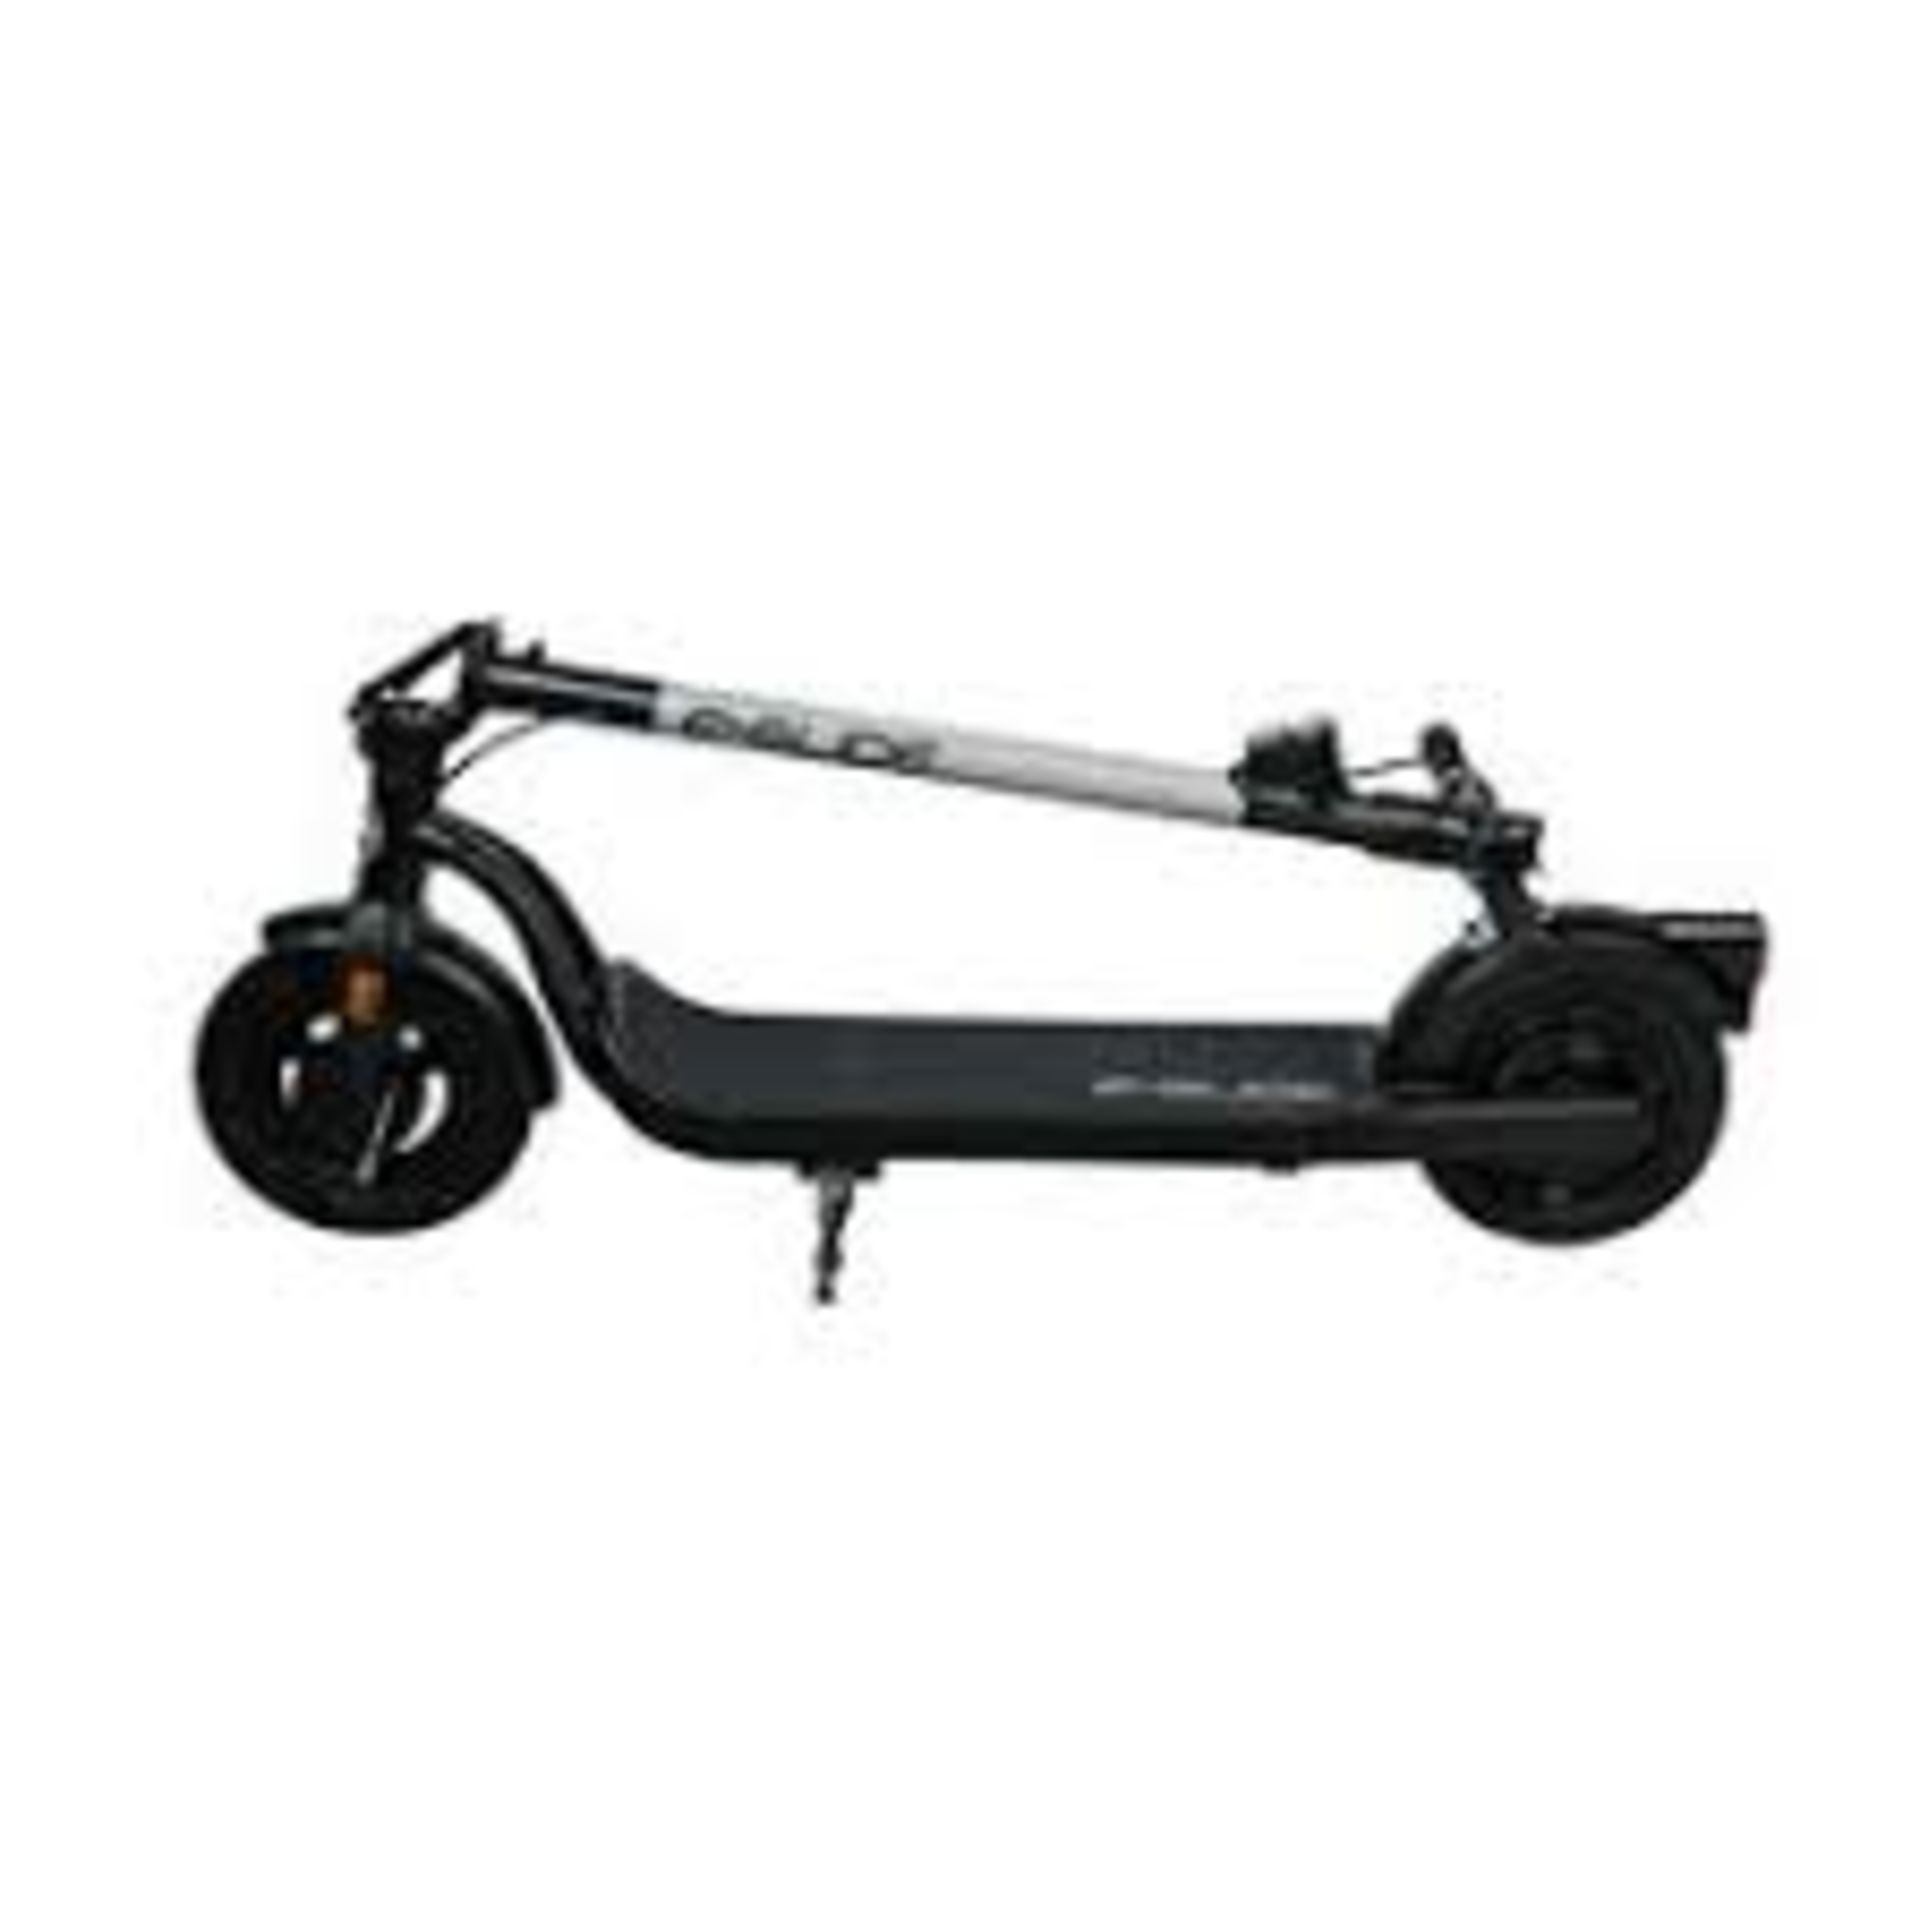 Trade Lot 4 x Brand New E-Glide V2 Electric Scooter Grey and Black RRP £599, Introducing a sleek and - Bild 2 aus 2